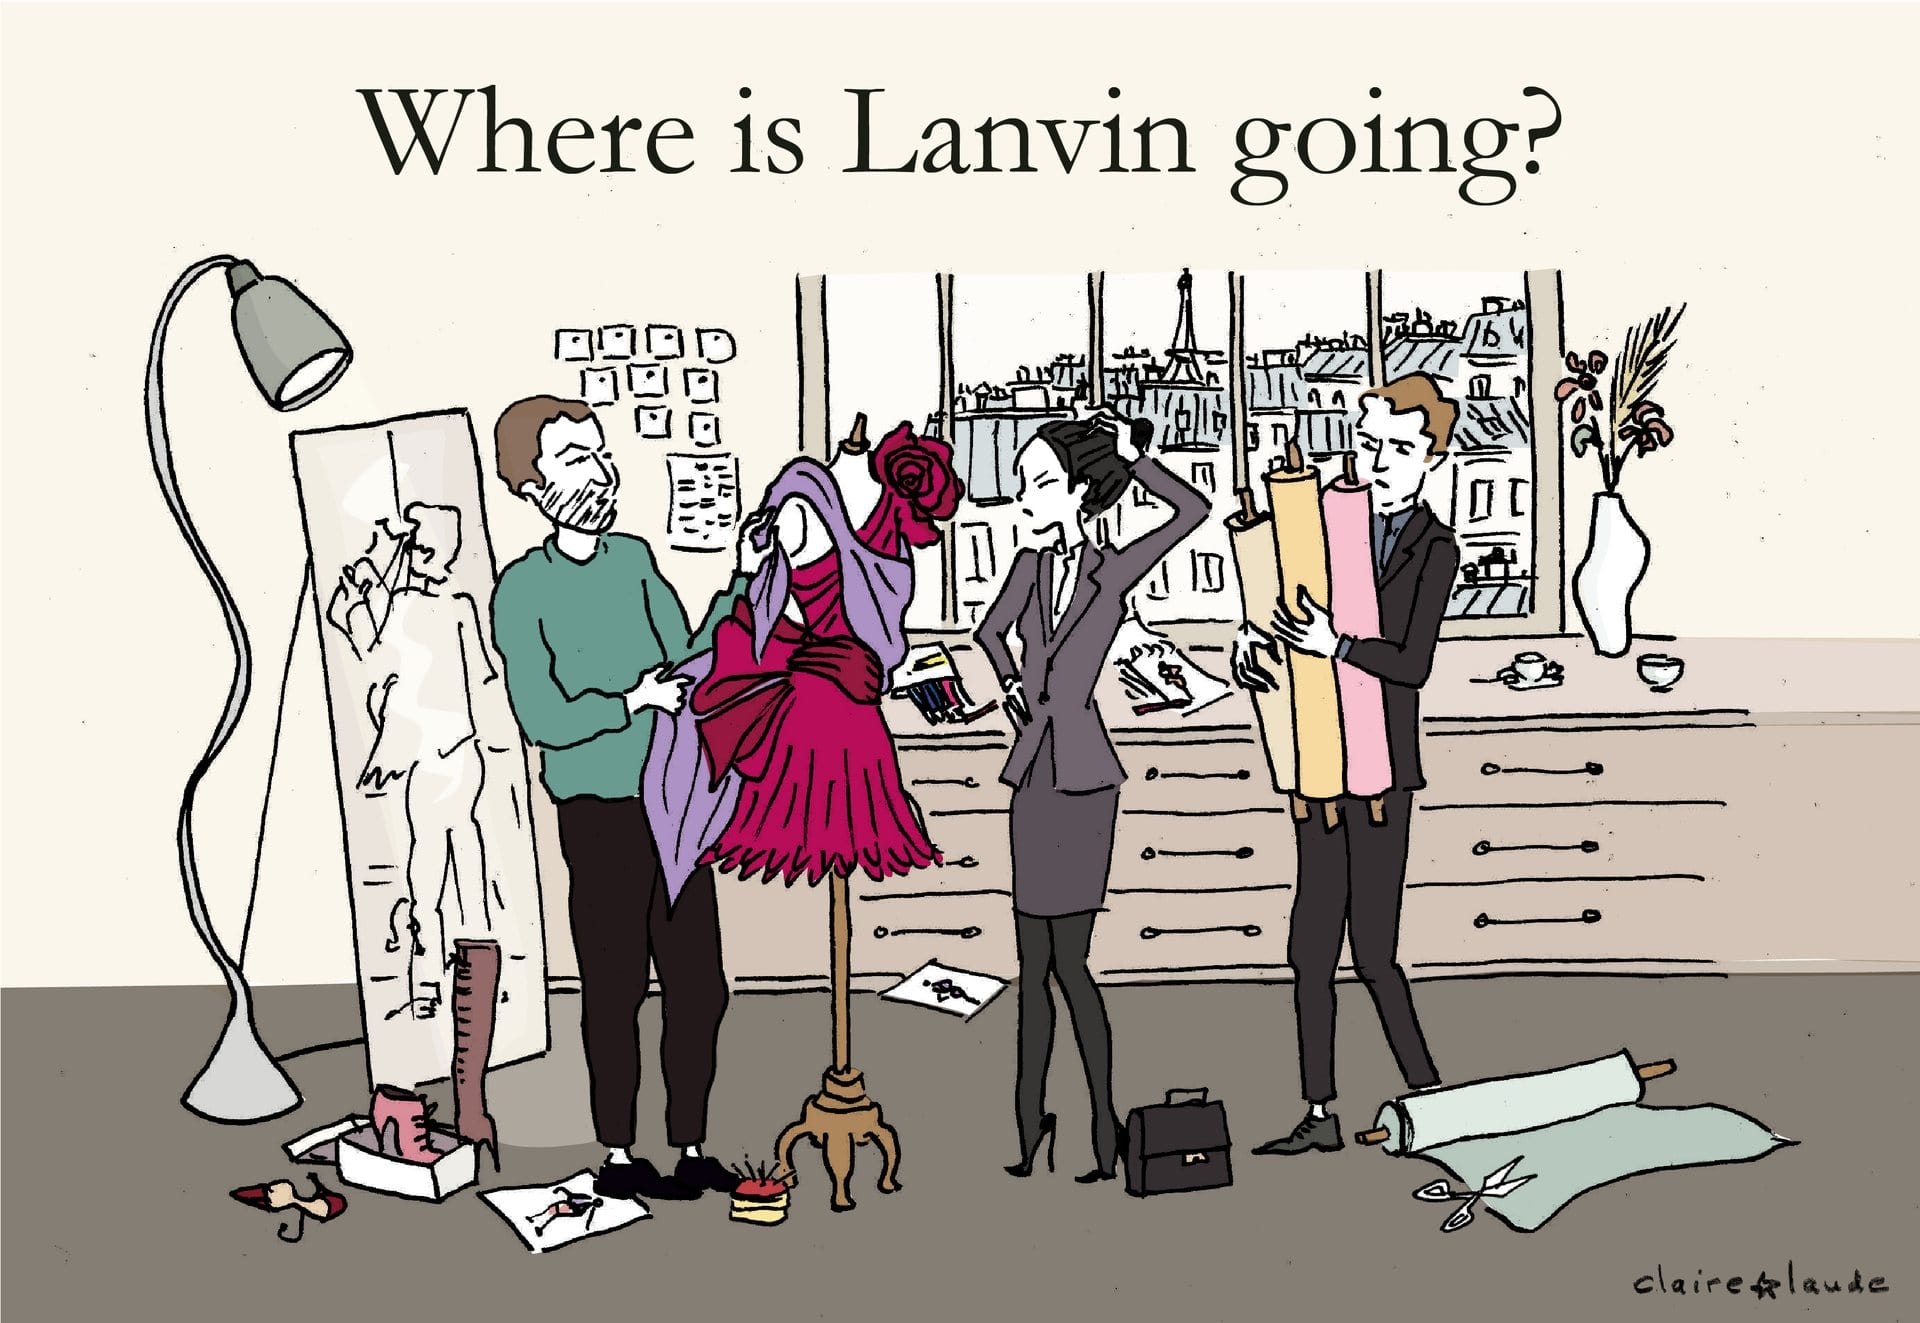 In reset mode, Lanvin seeks to fix its Chinese owners’ mistakes